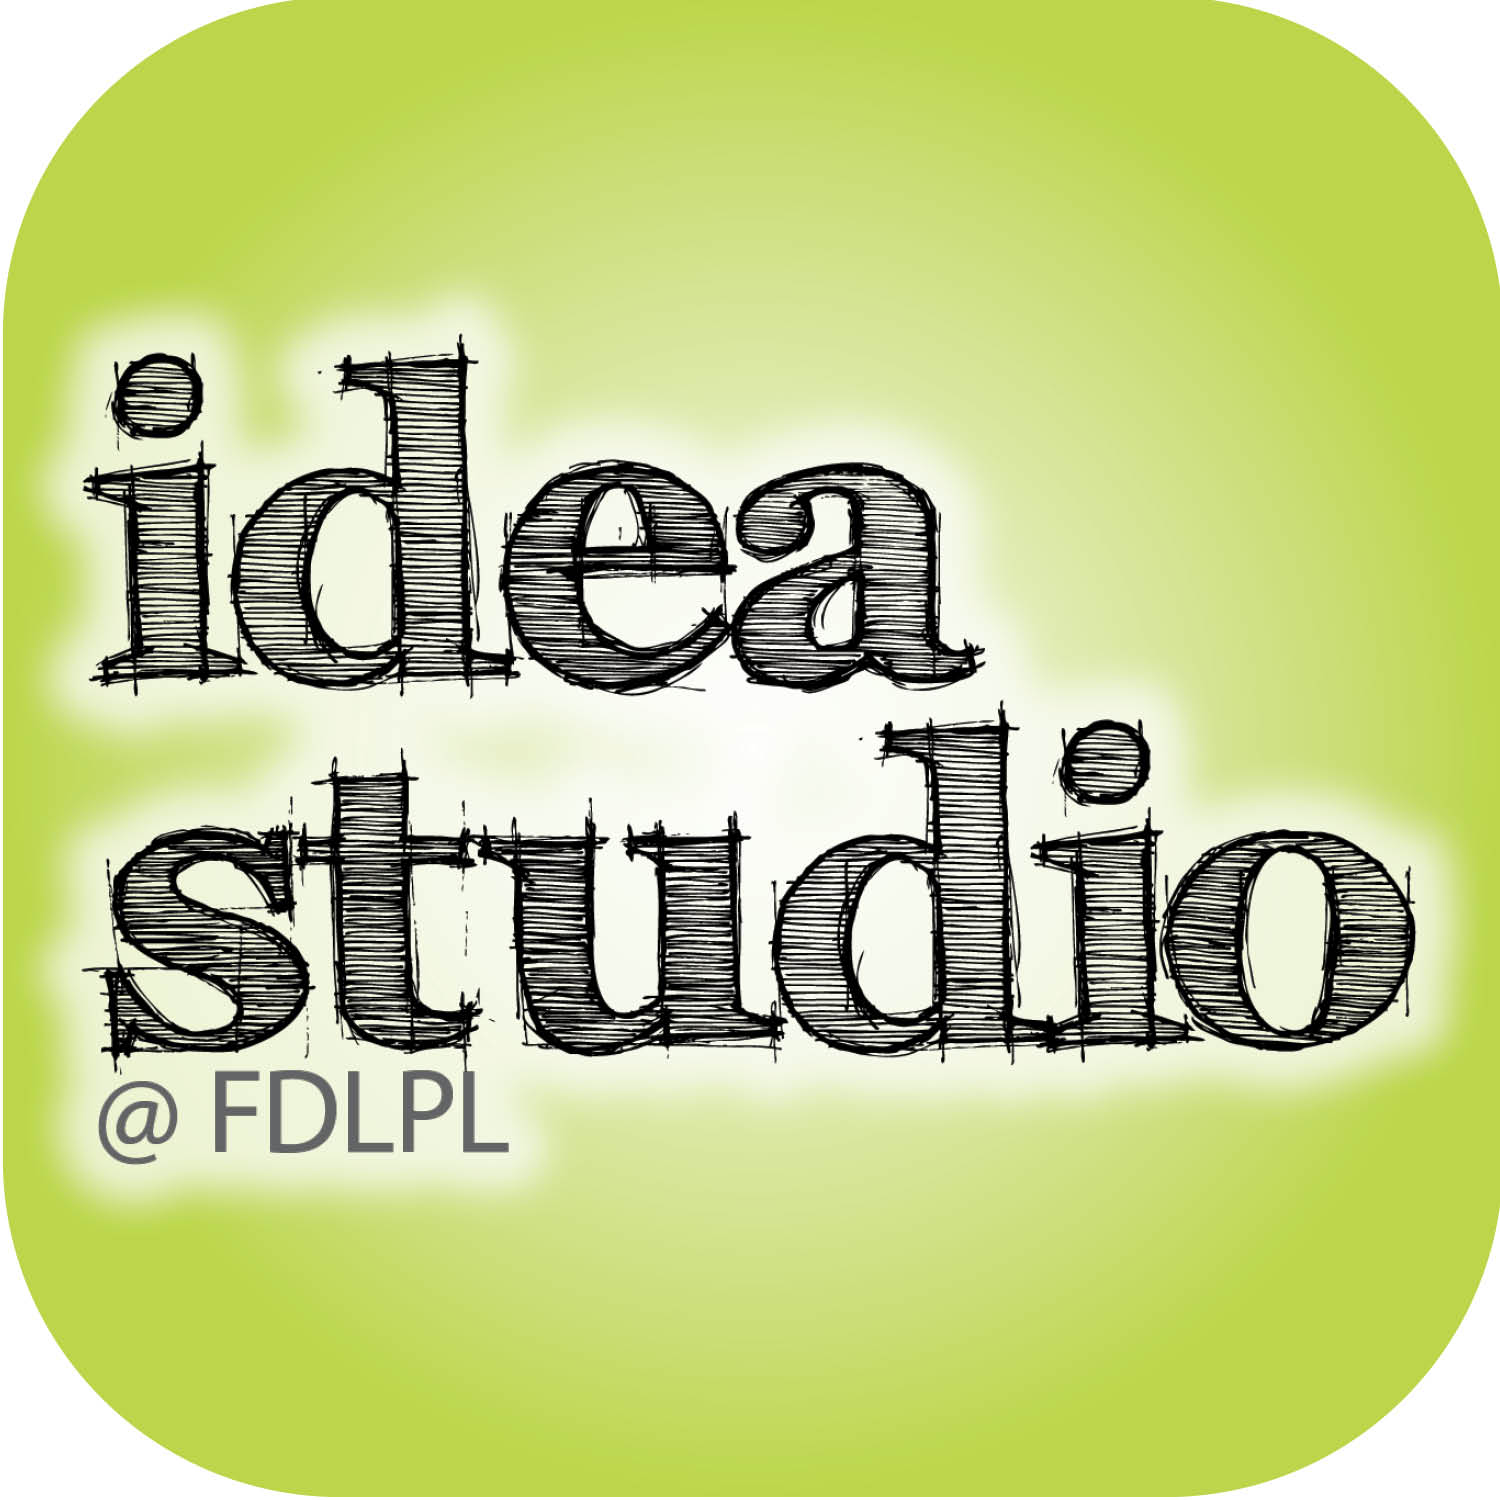 Discover what can you create in FDLPL’s Idea Studio during July